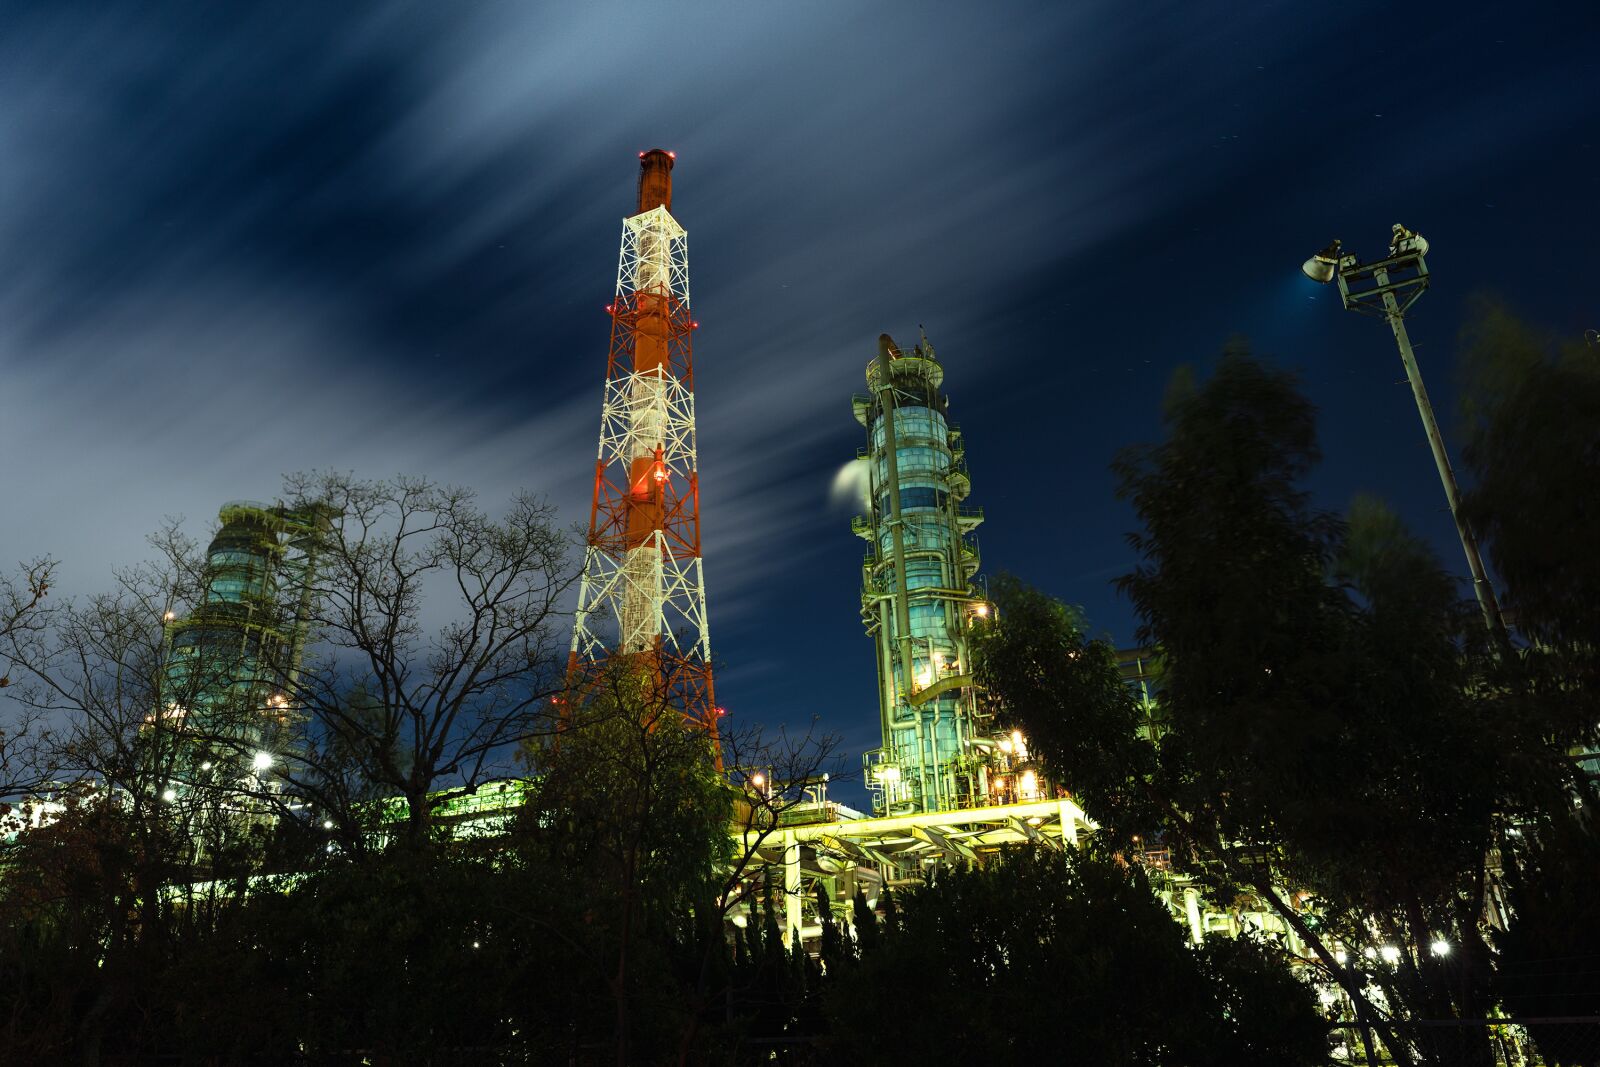 Sony a7R IV sample photo. Night view, factory, oil-related photography